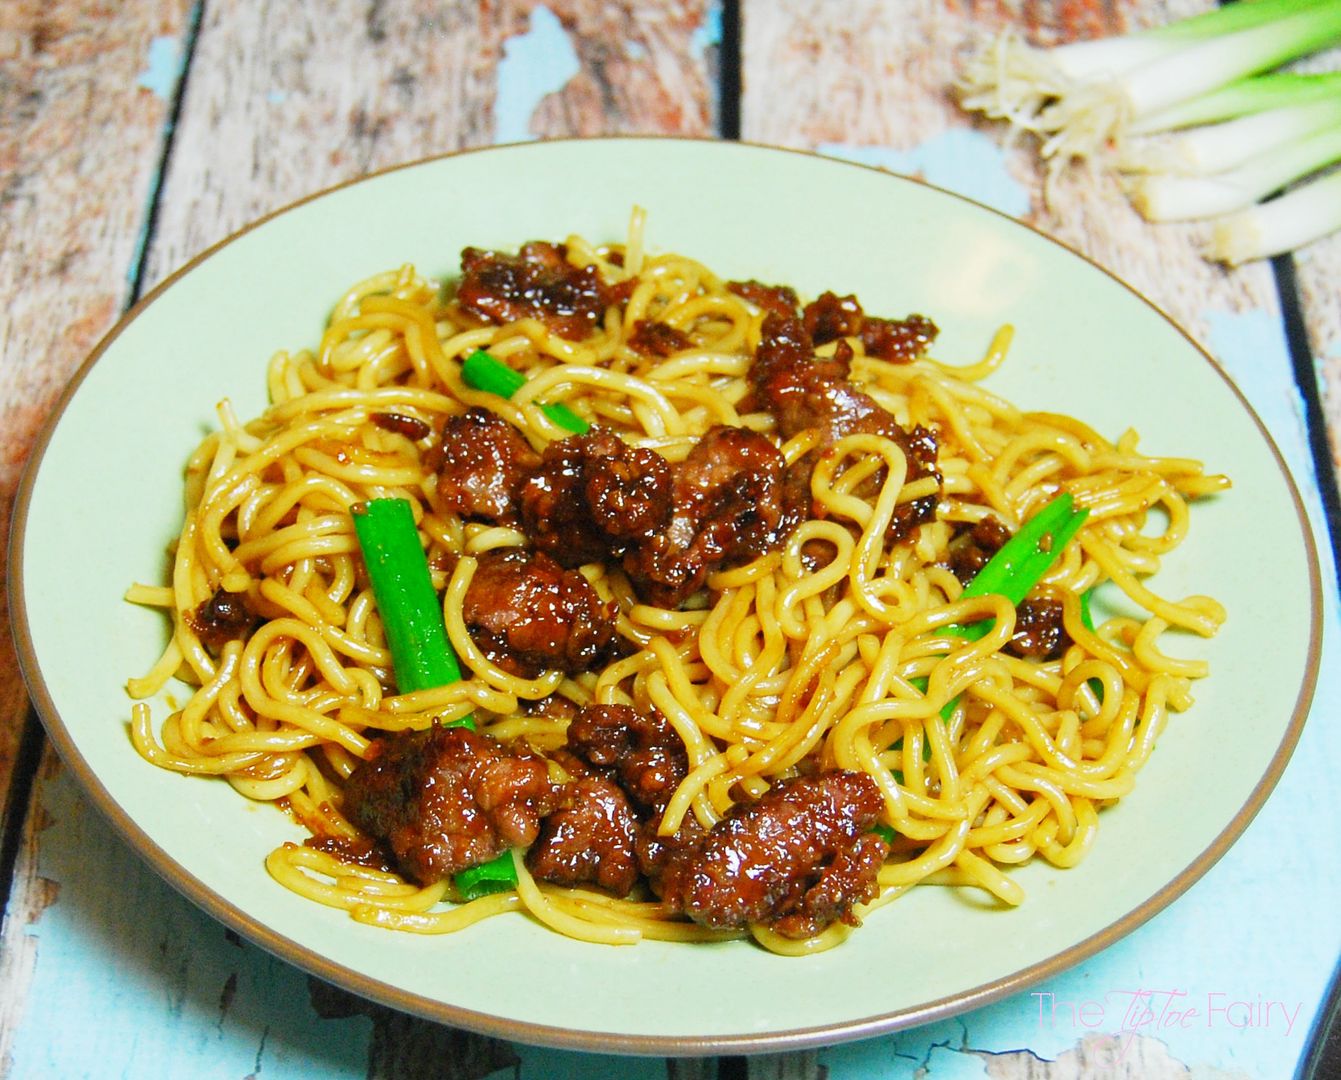 Copy Cat Pei Wei Mongolian Beef - a super easy recipe that tastes just like the real thing! | The TipToe Fairy #peiwei #copycat